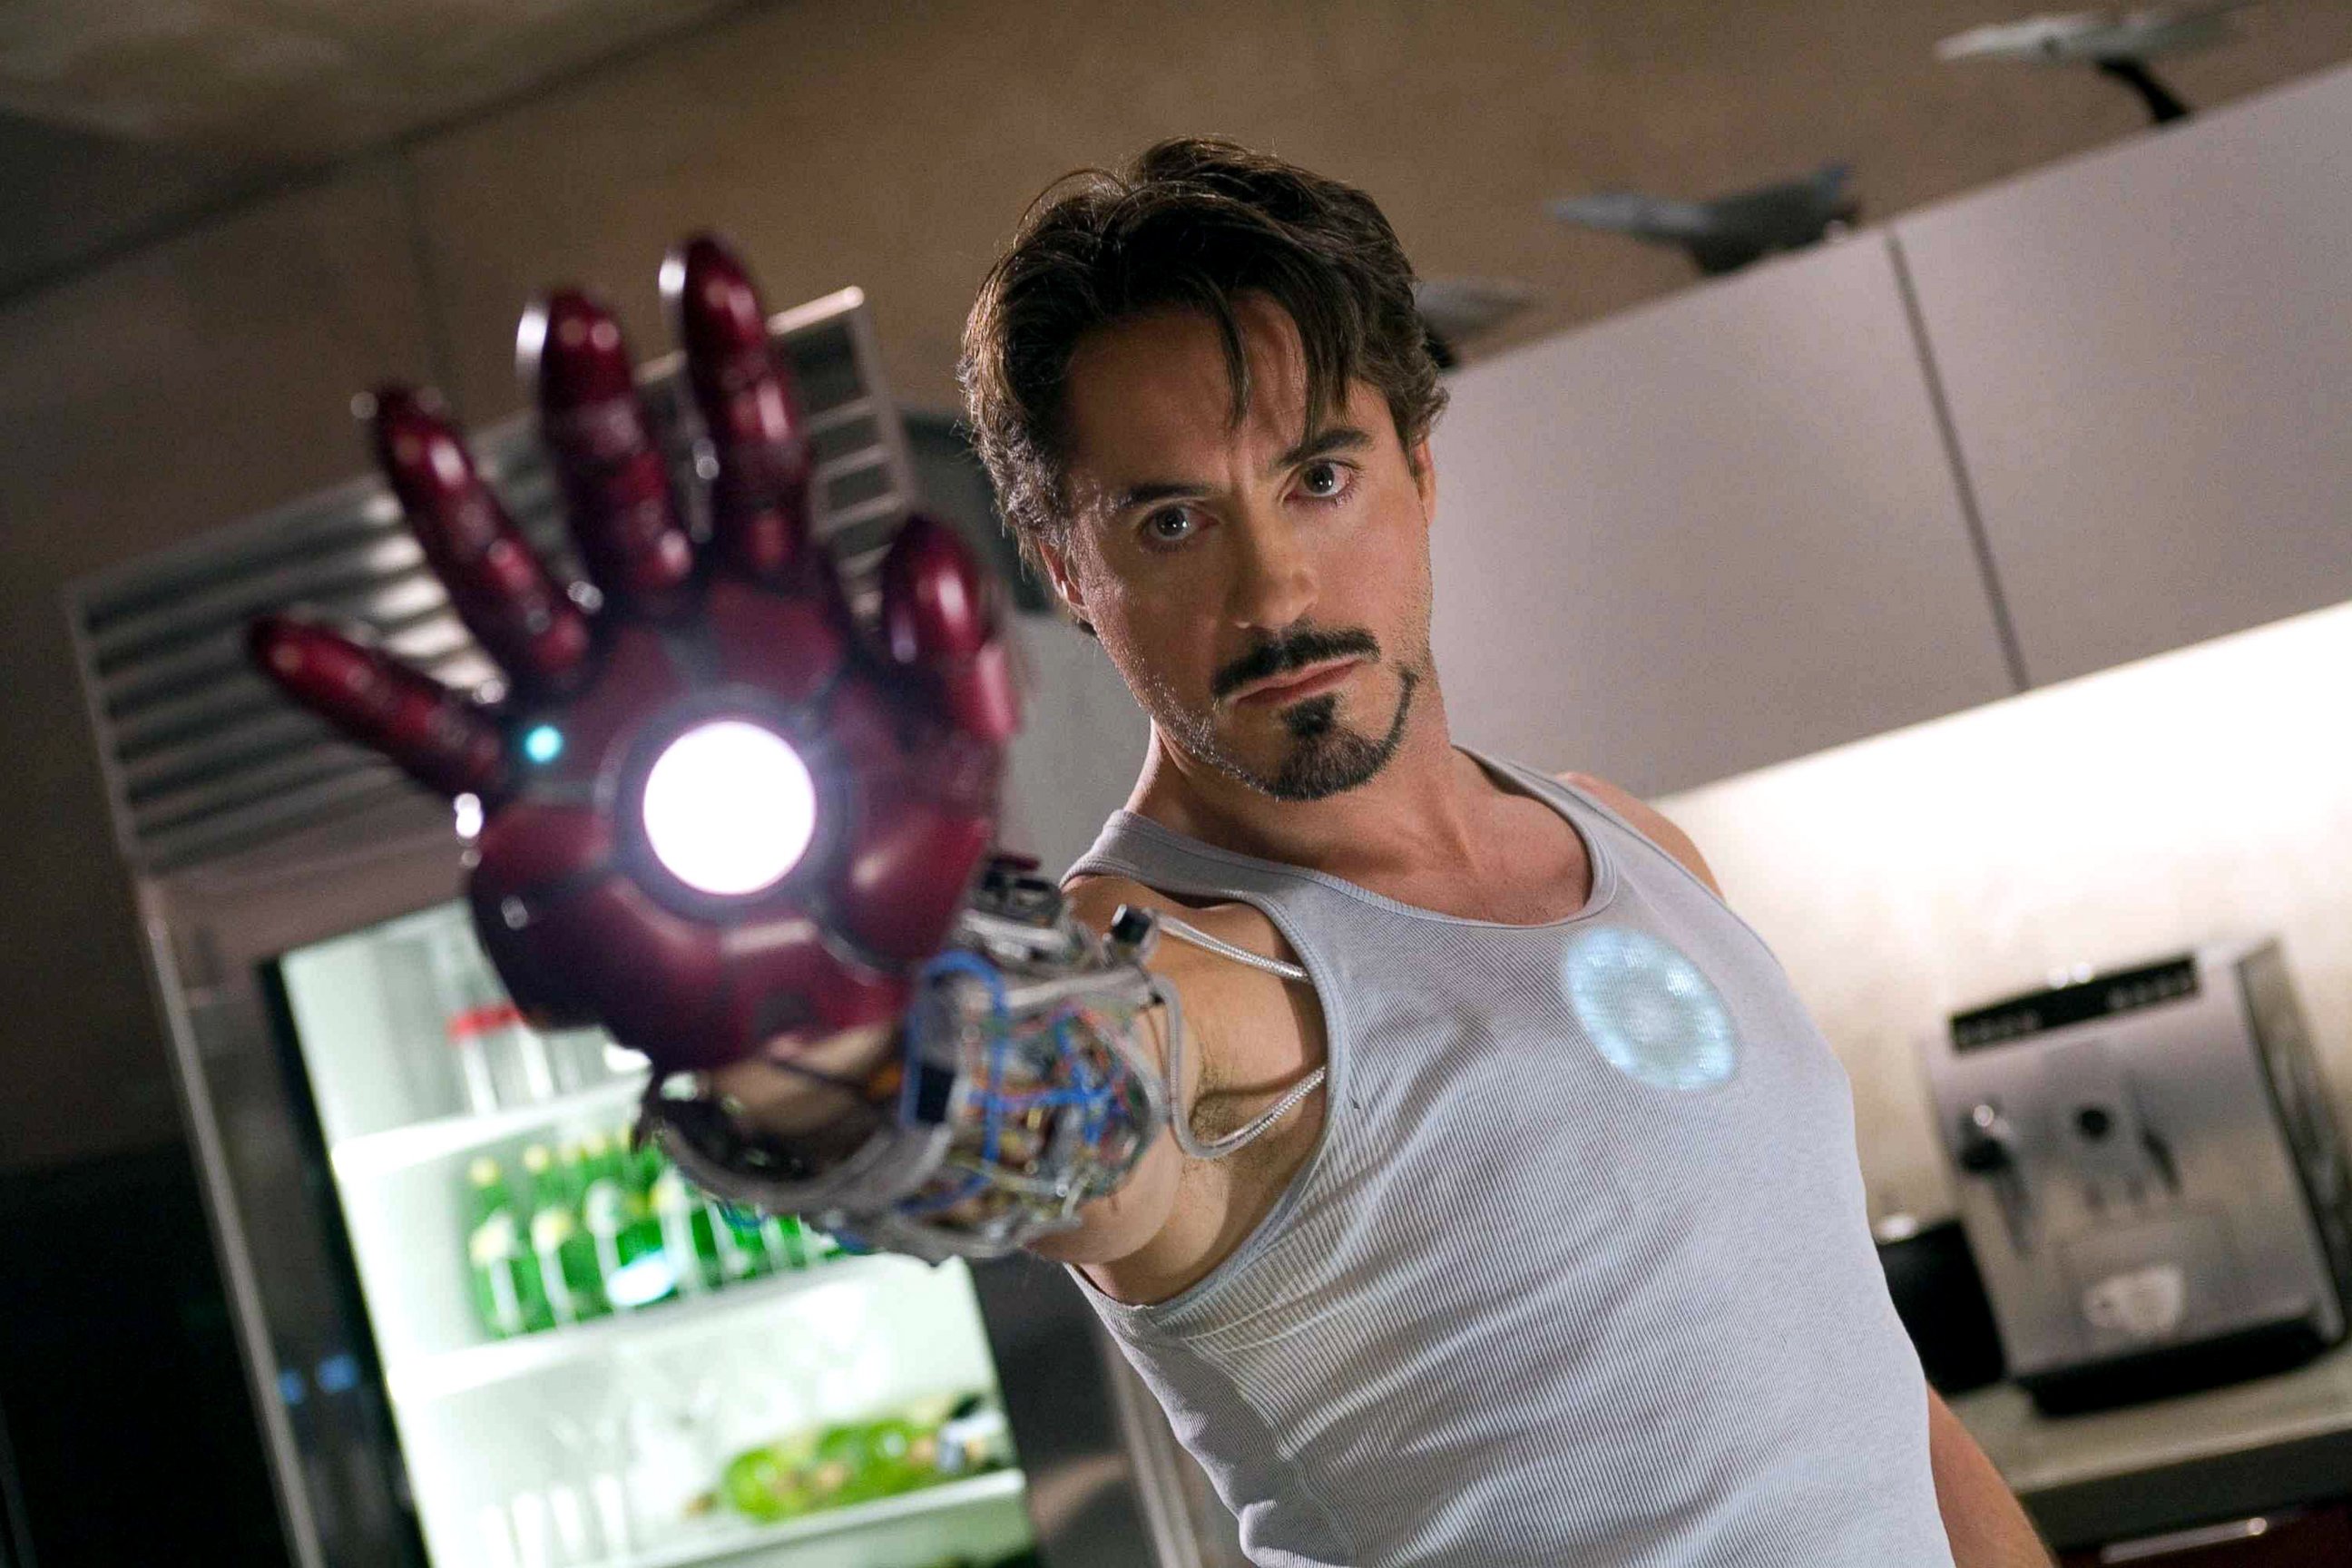 Robert Downey Jr. as Iron Man on set in an undated file photo.